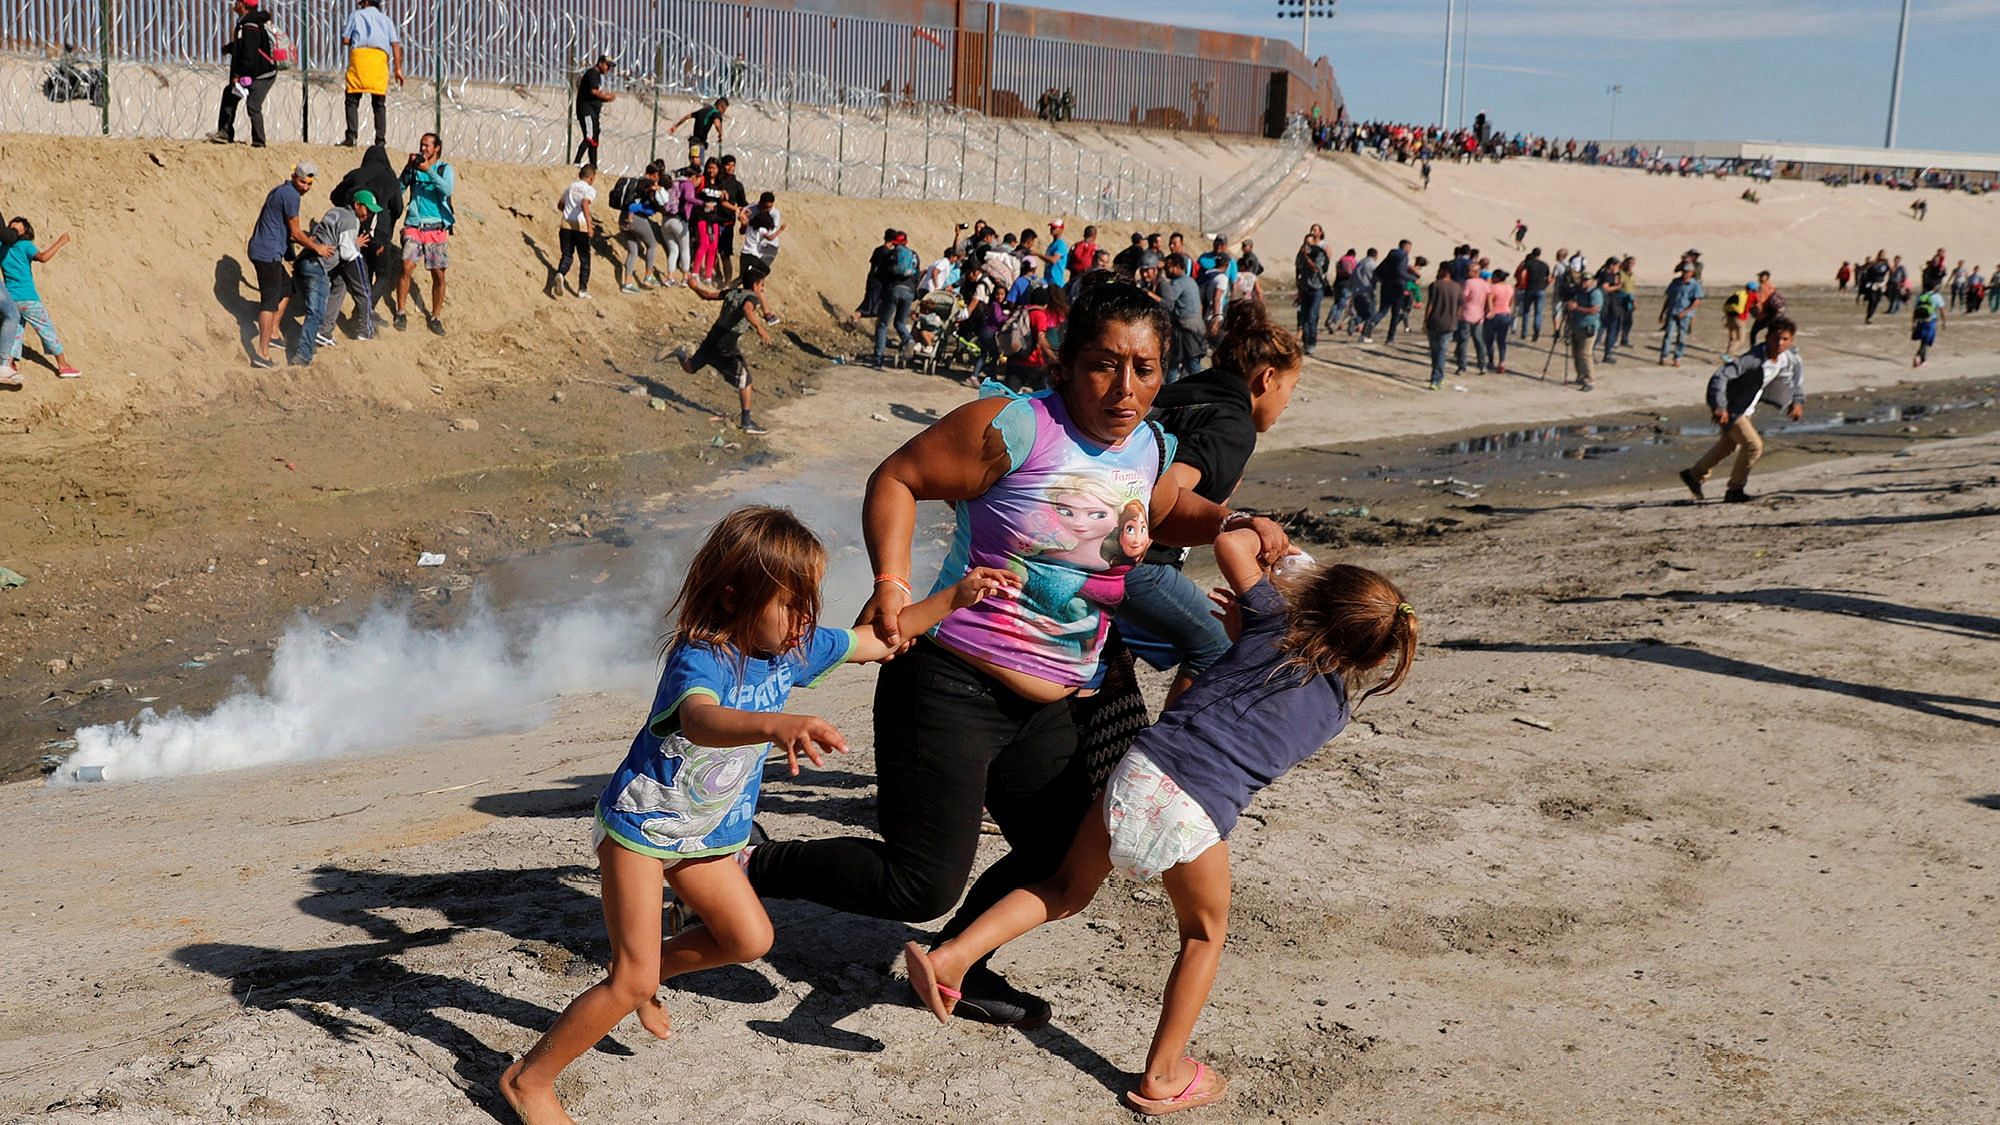 A migrant family runs away from the tear gas attack